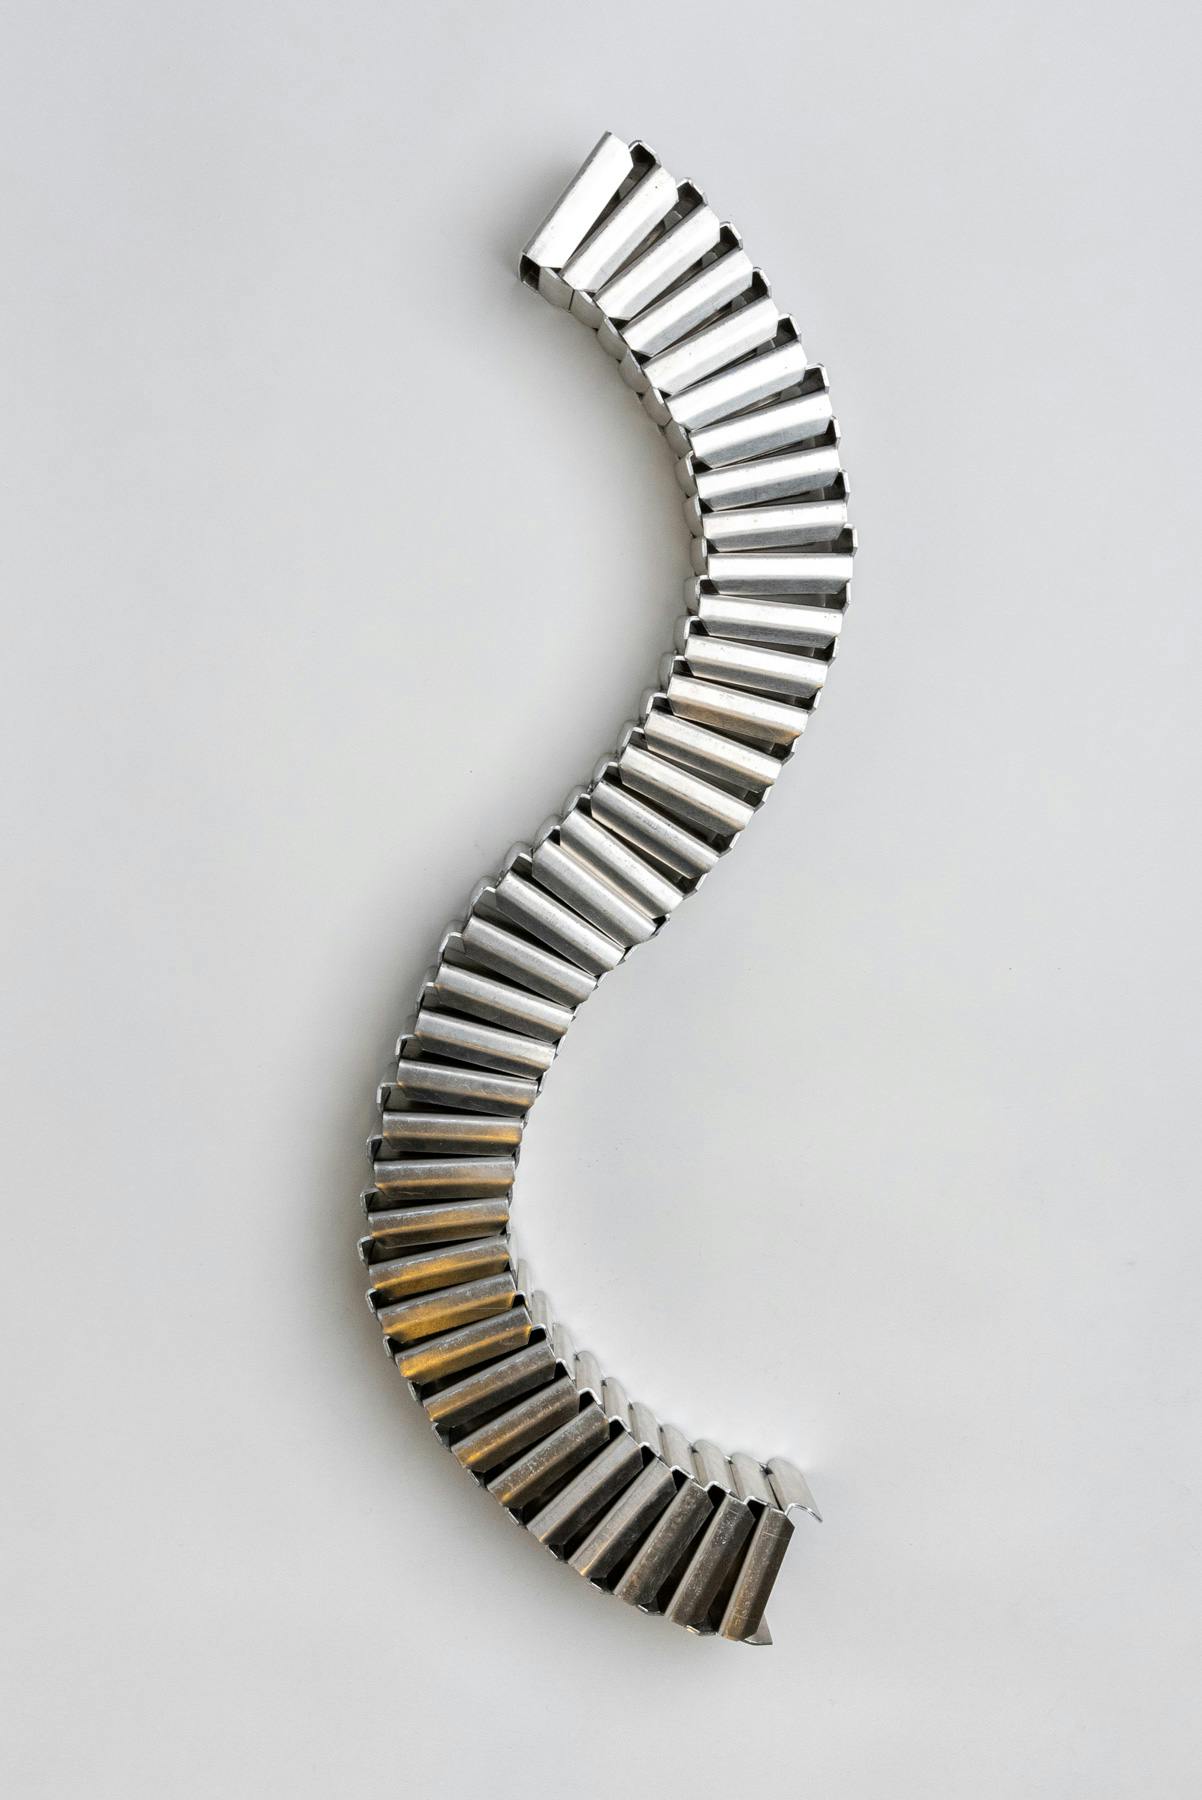 The long string of clips curved into a backward S-shape.